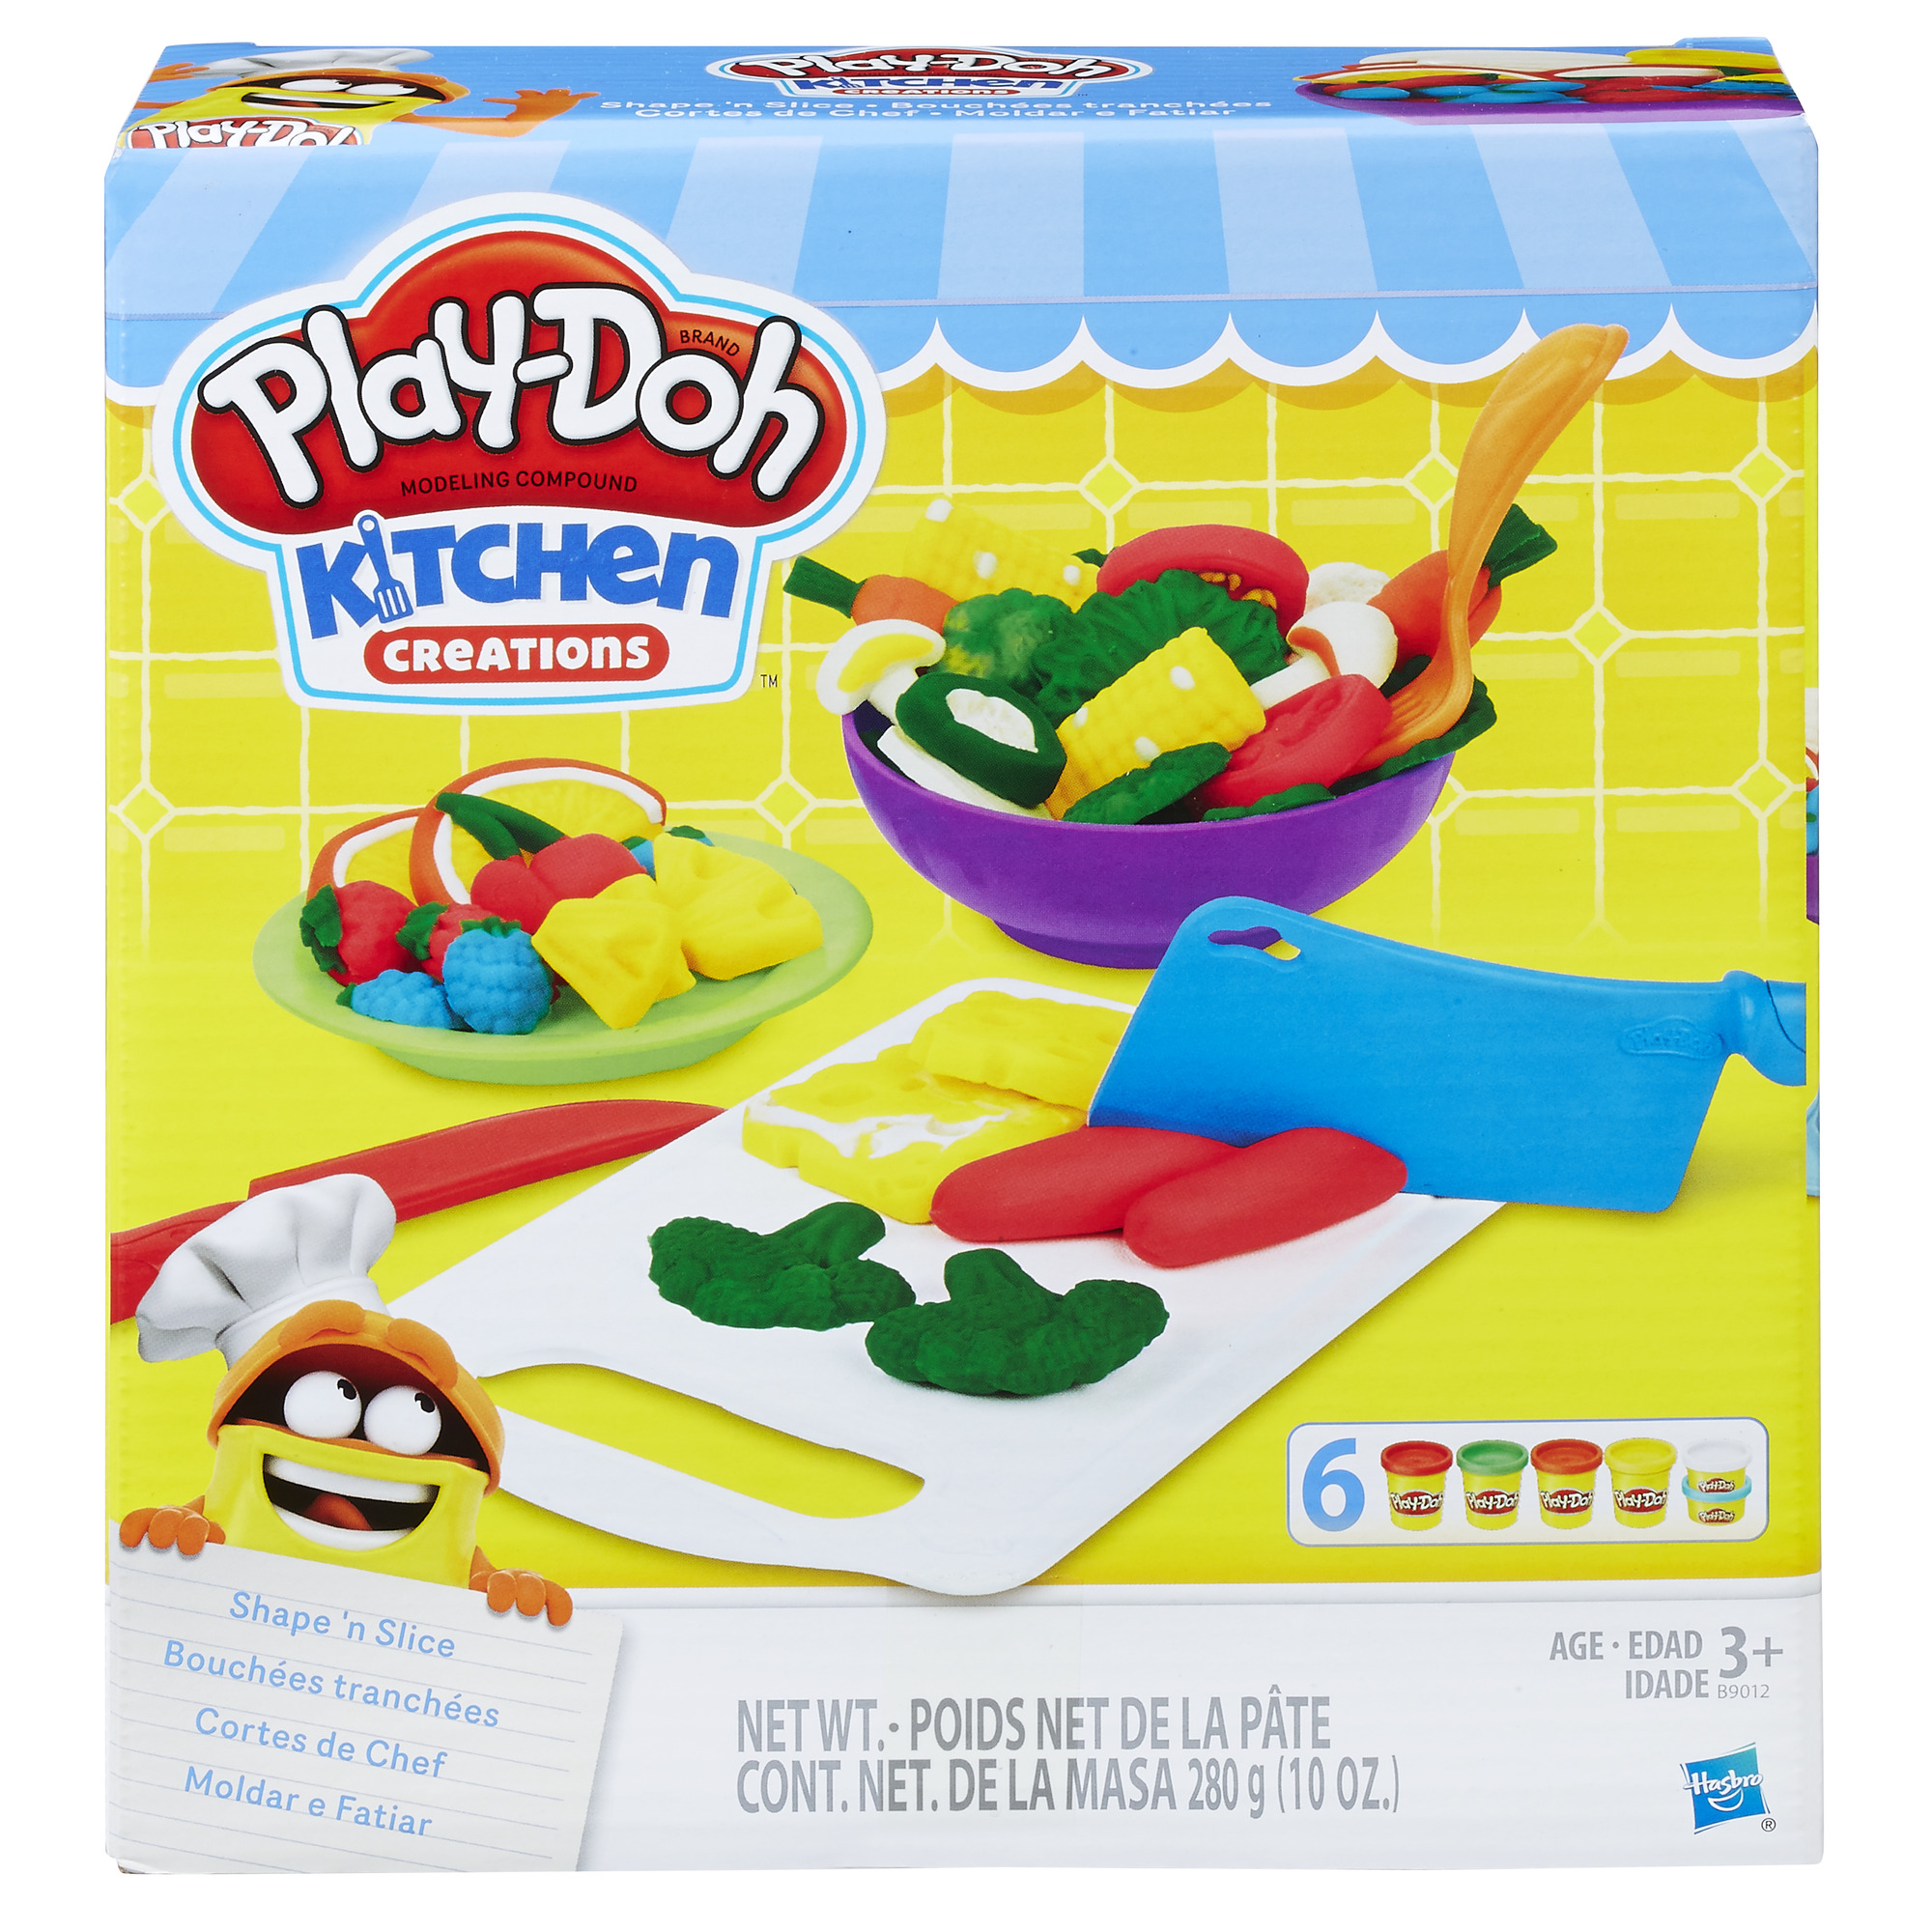 Play-Doh Kitchen Creations Shape 'N Slice Food Set with 6 Cans of Play-Doh - image 1 of 2